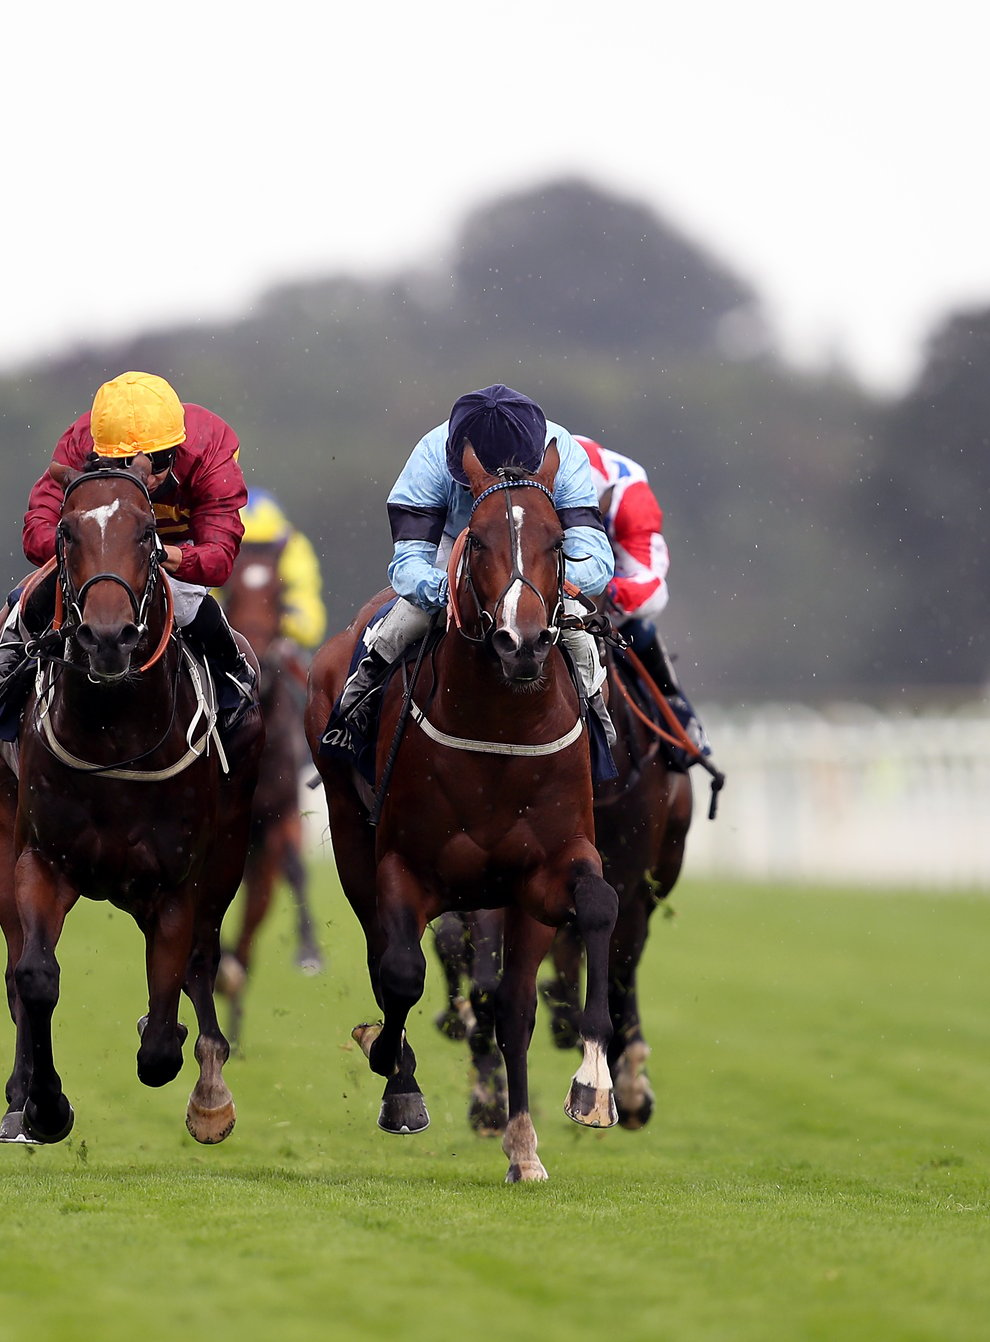 Gear Up (centre) claims Spycatcher close home to win the Tattersalls Acomb Stakes at York